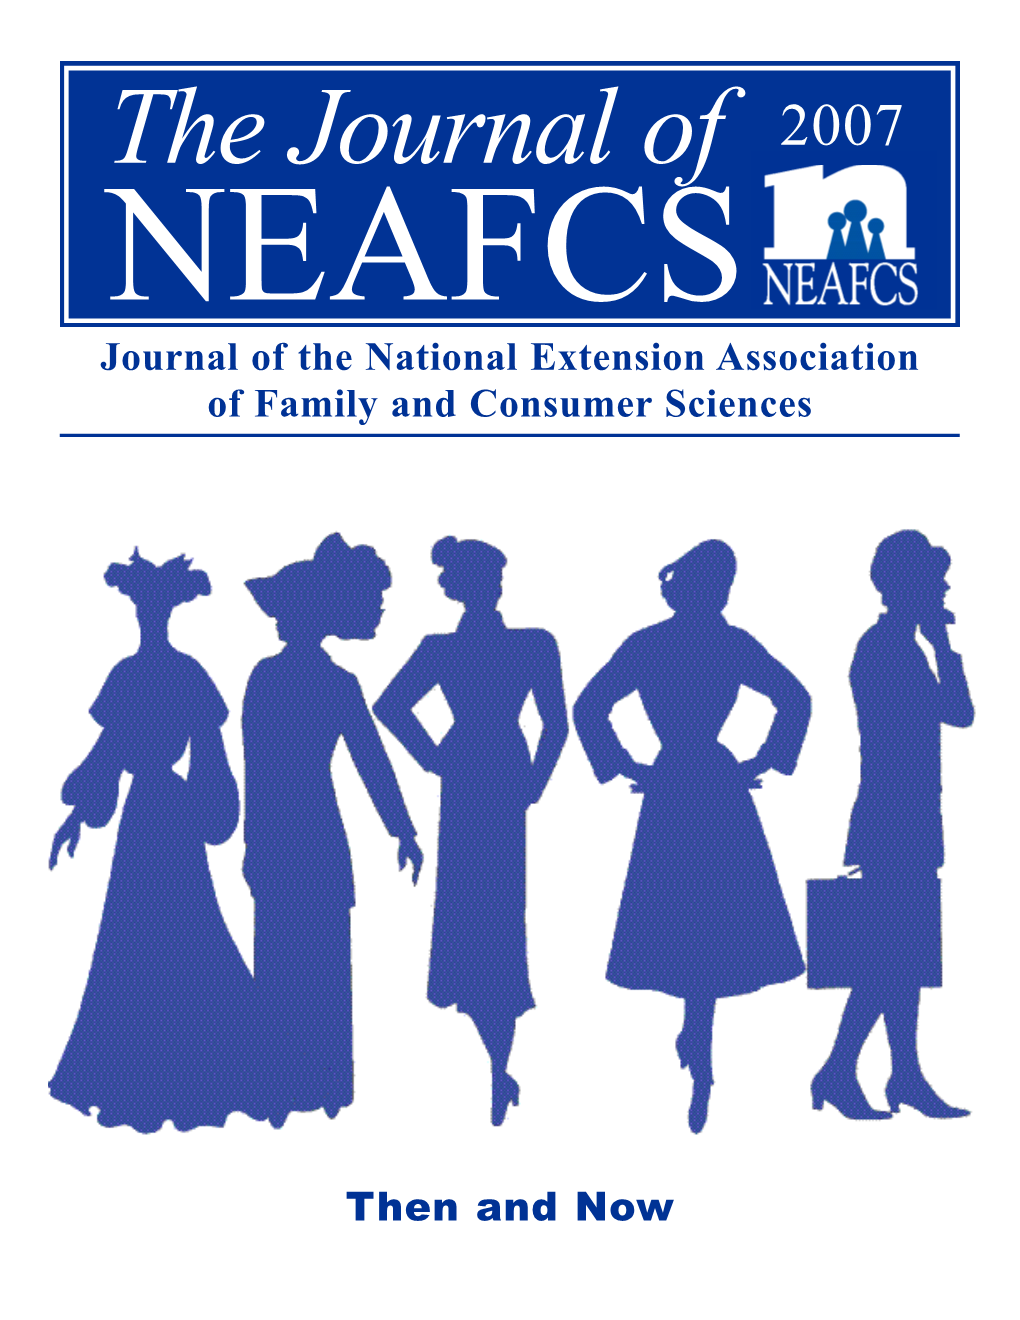 The Journal of NEAFCS 2007